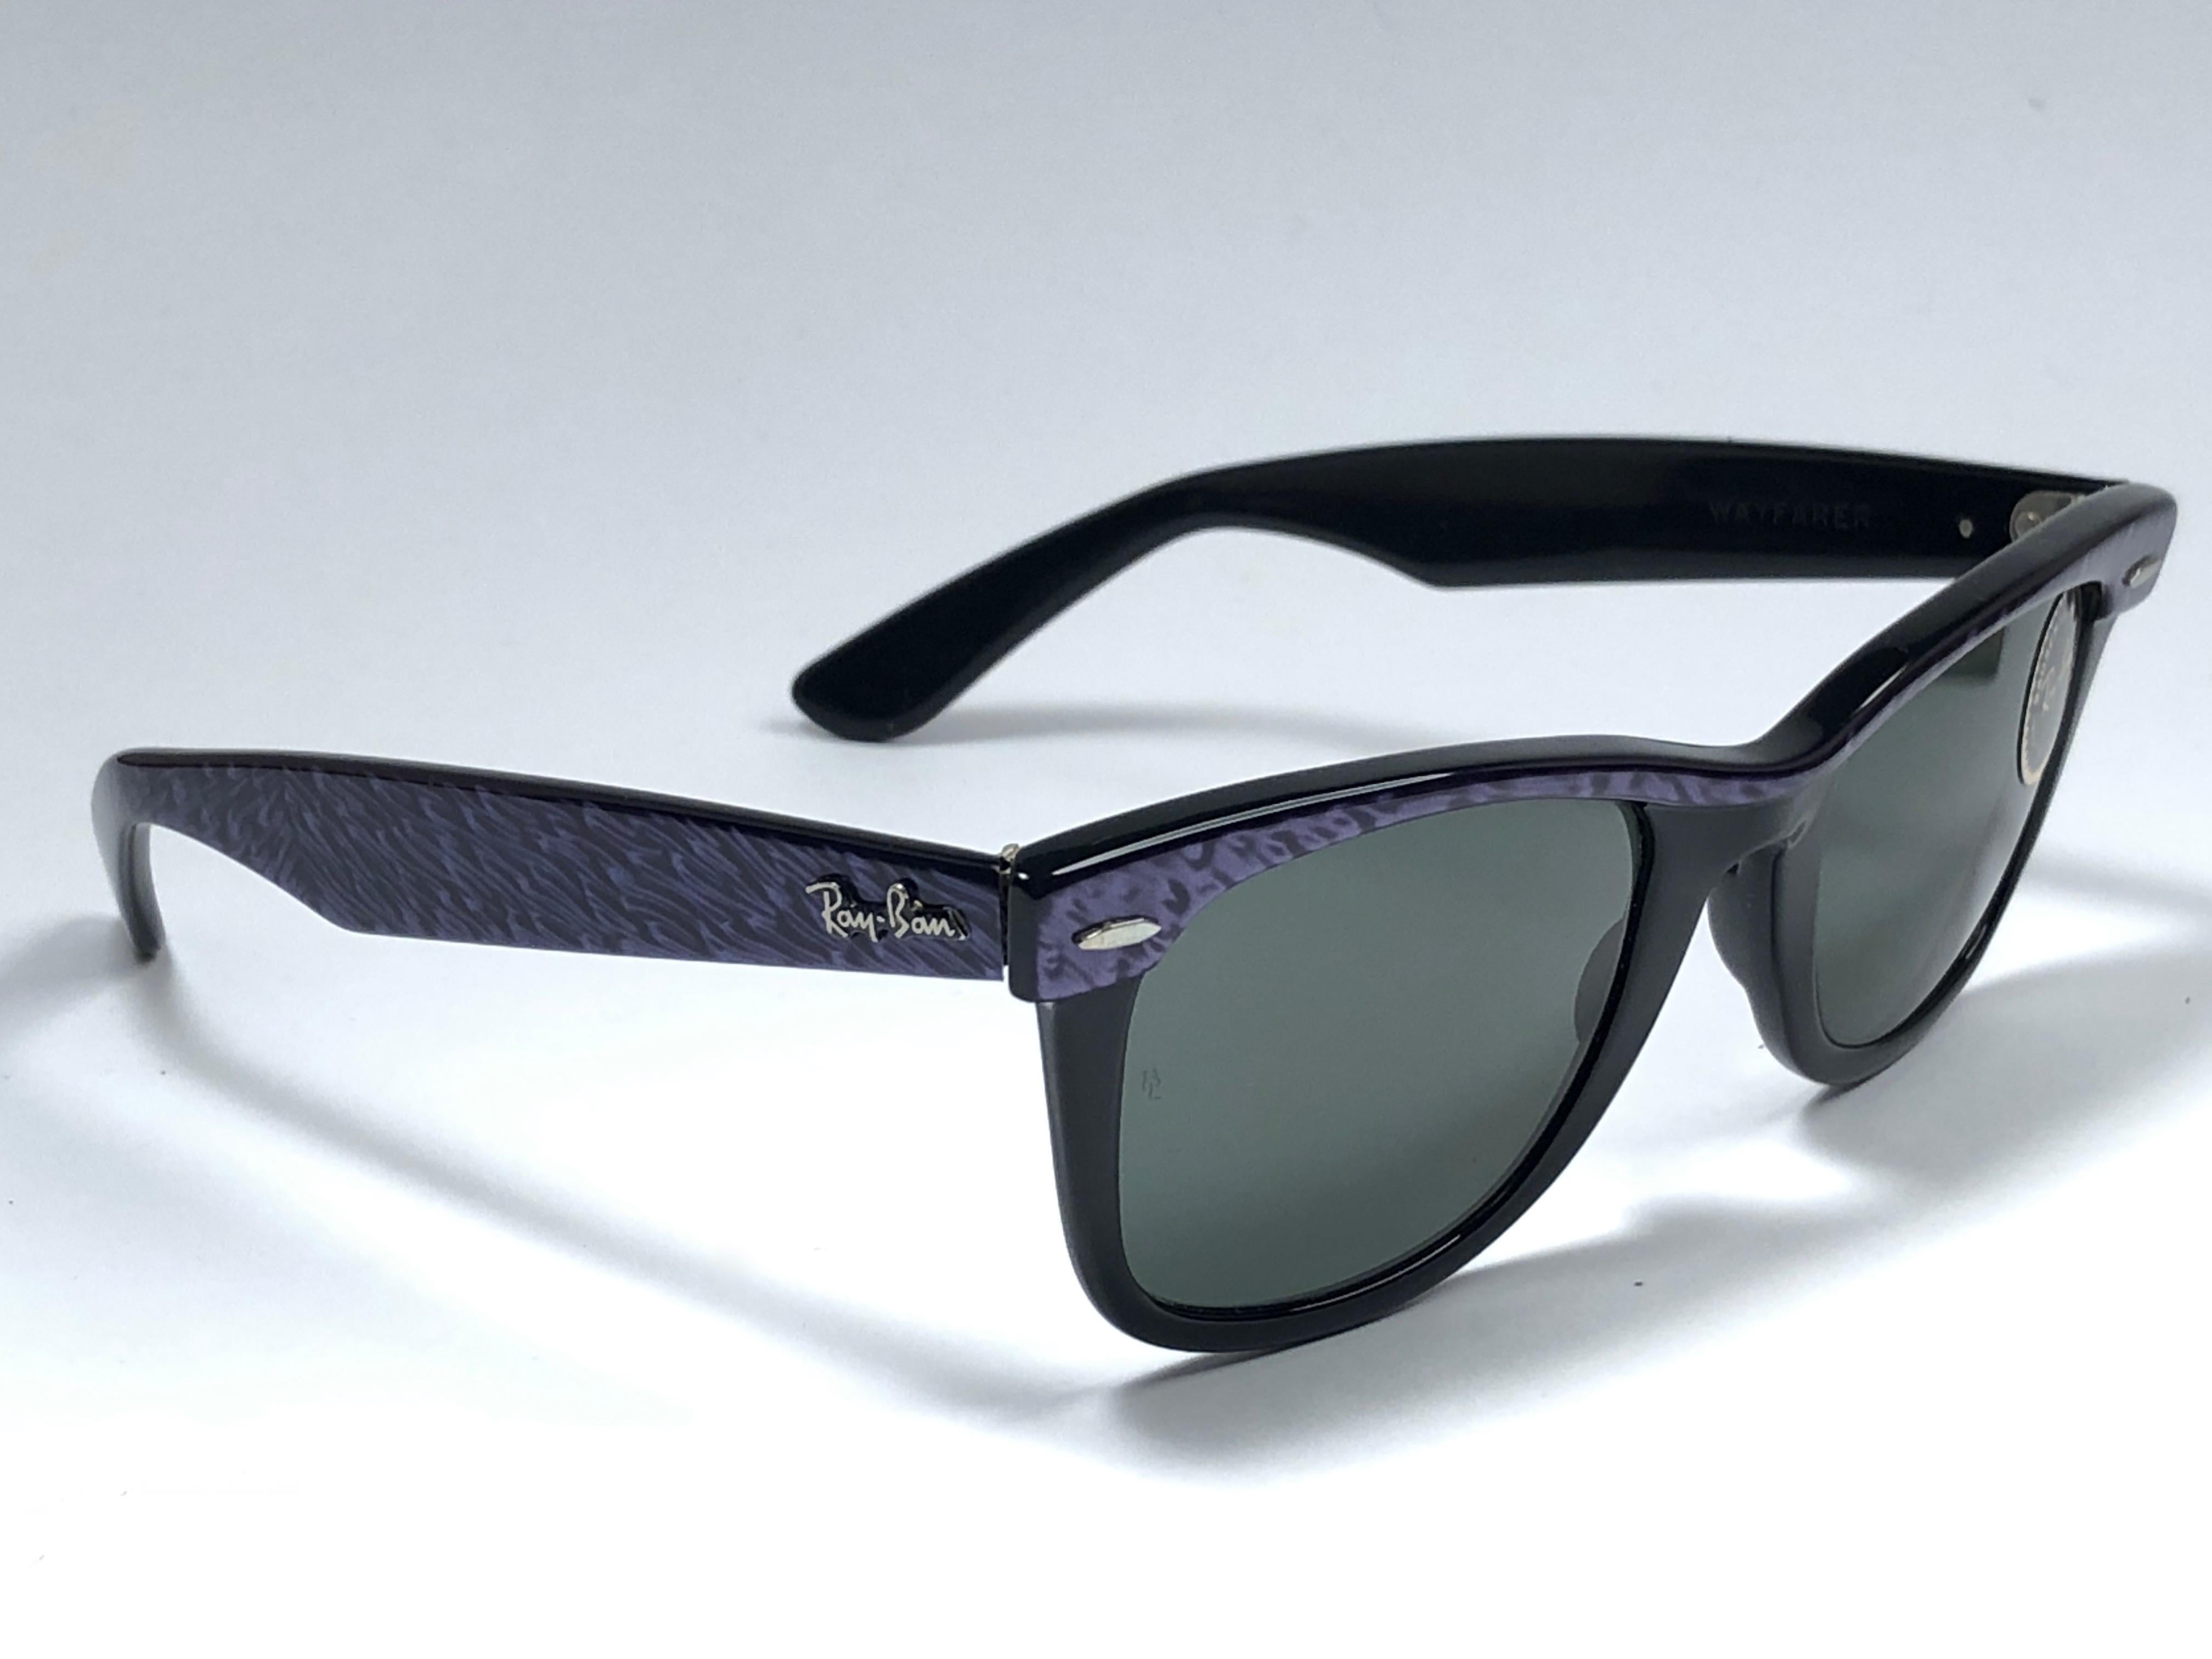 New classic Wayfarer in purple & black. B&L etched in both G15 grey lenses. Please notice that this item is nearly 40 years old and could show some storage wear.  
New, ever worn or displayed.